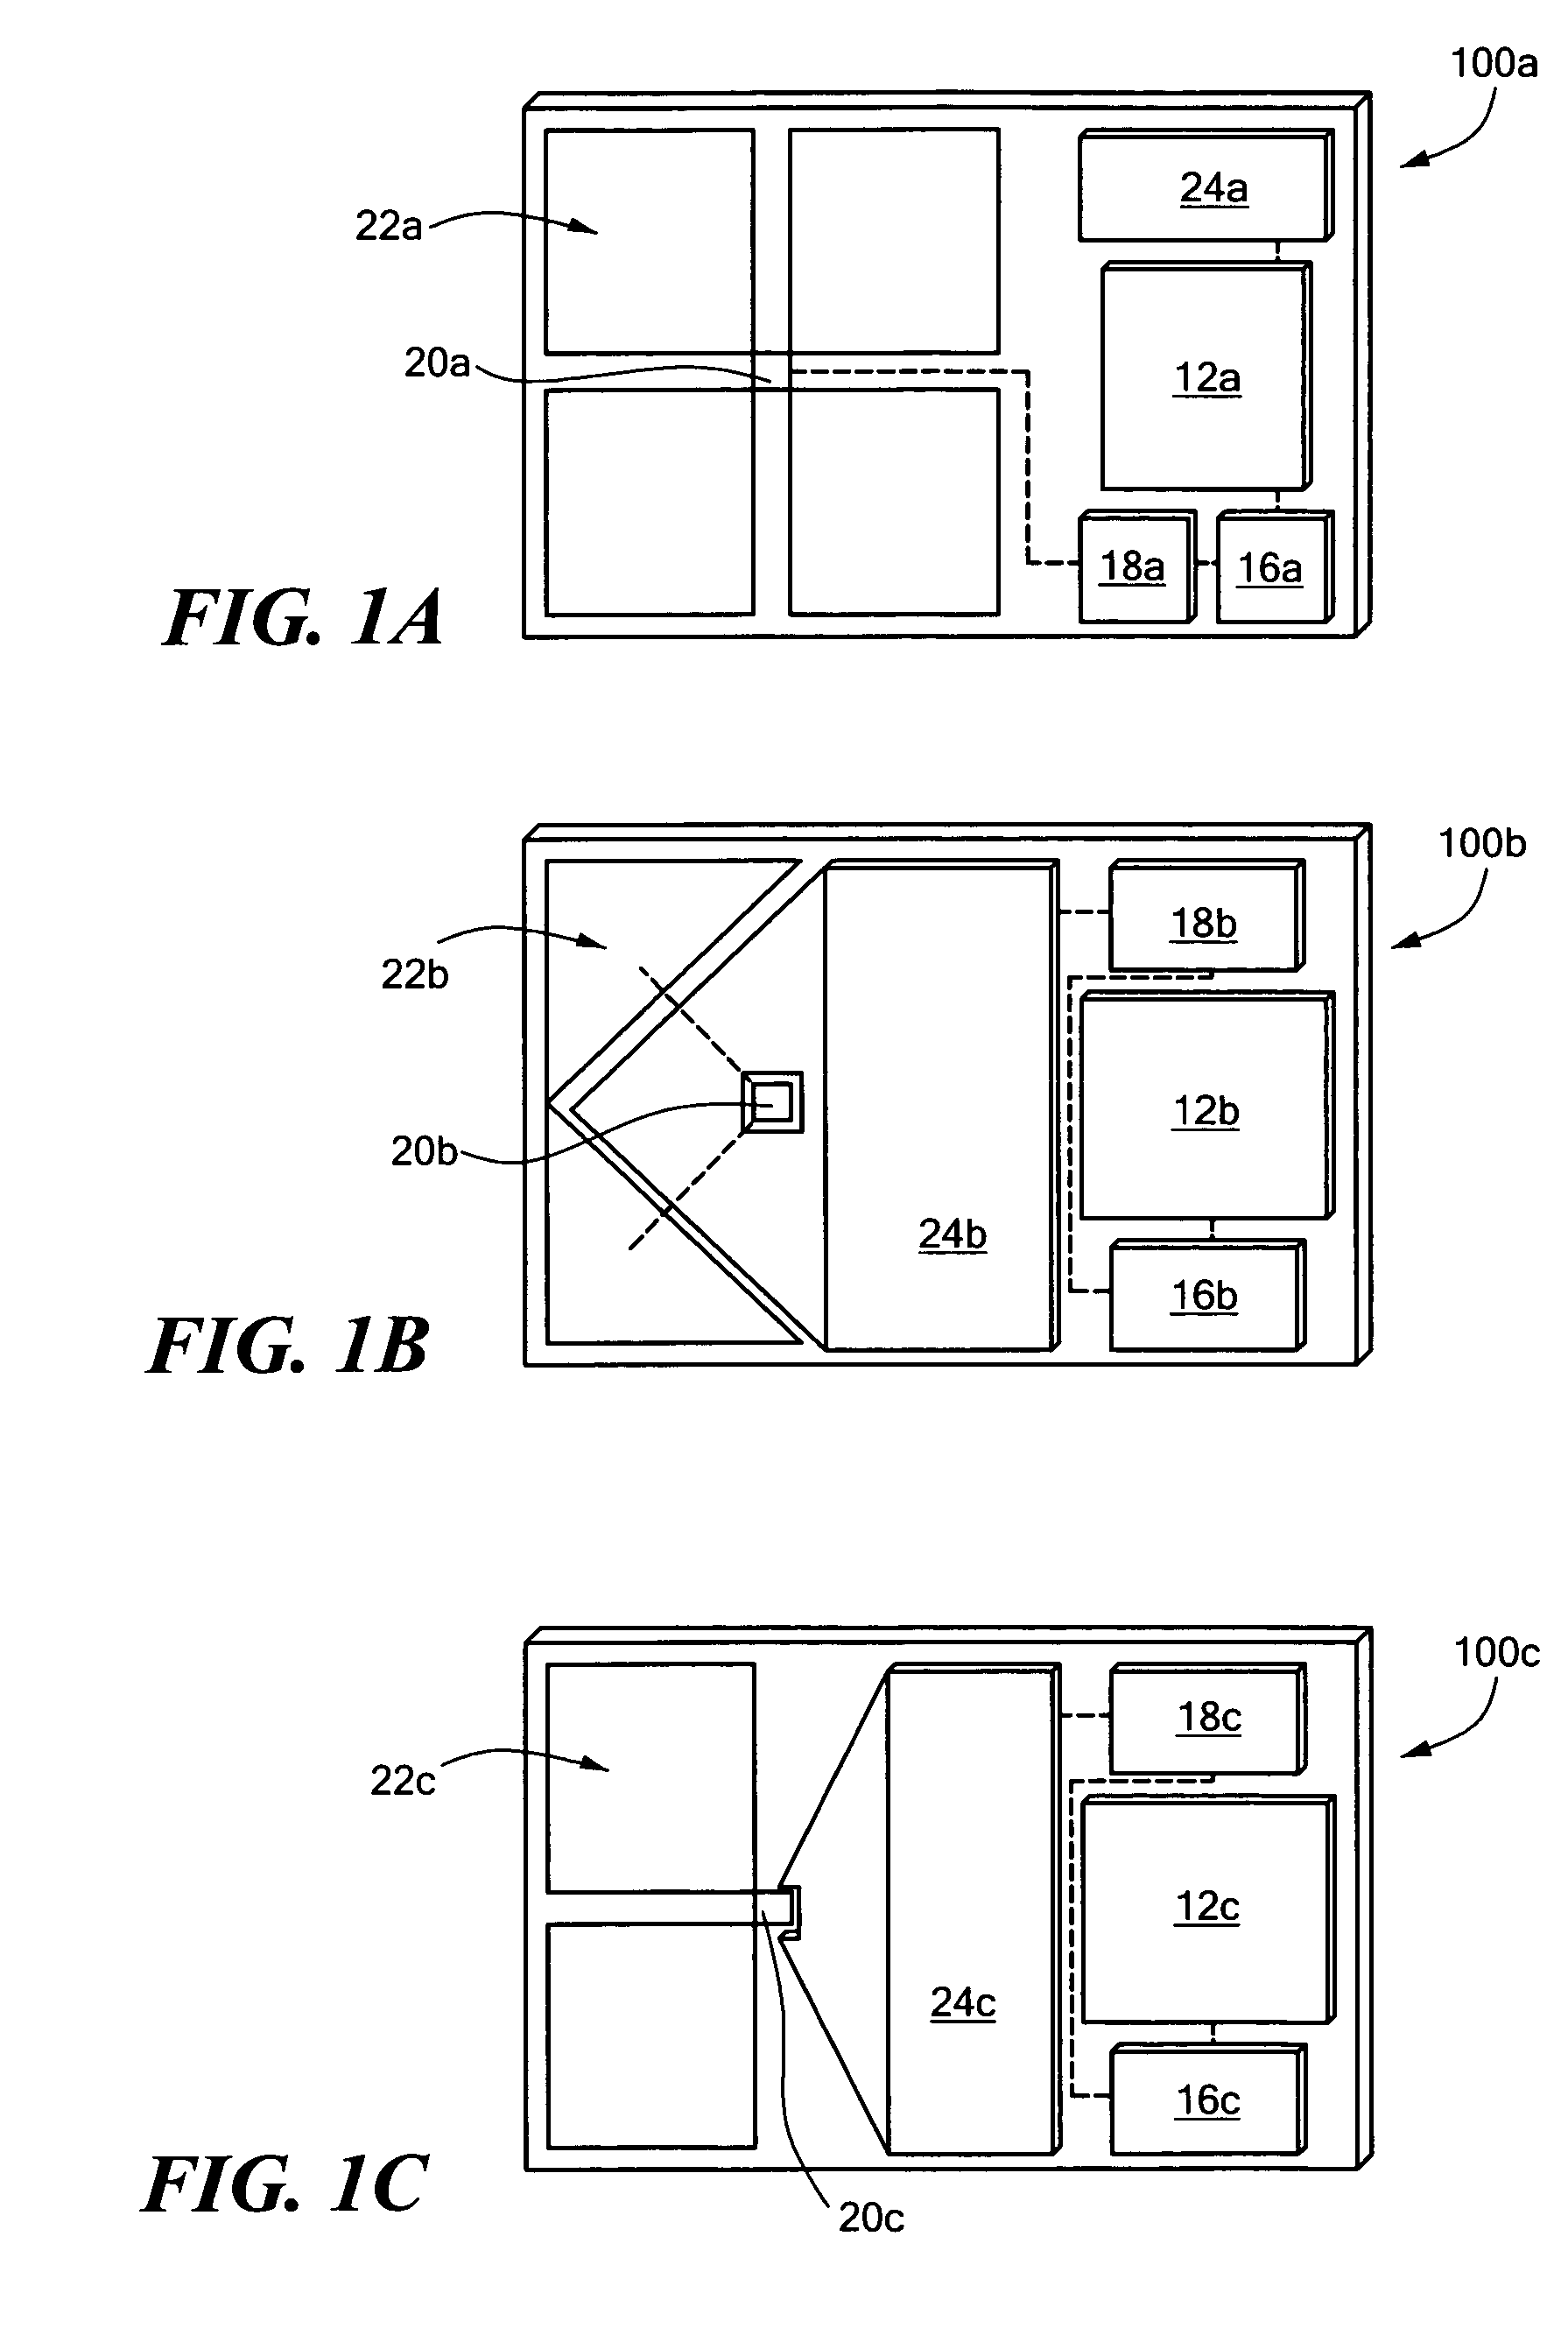 Personal authentication device